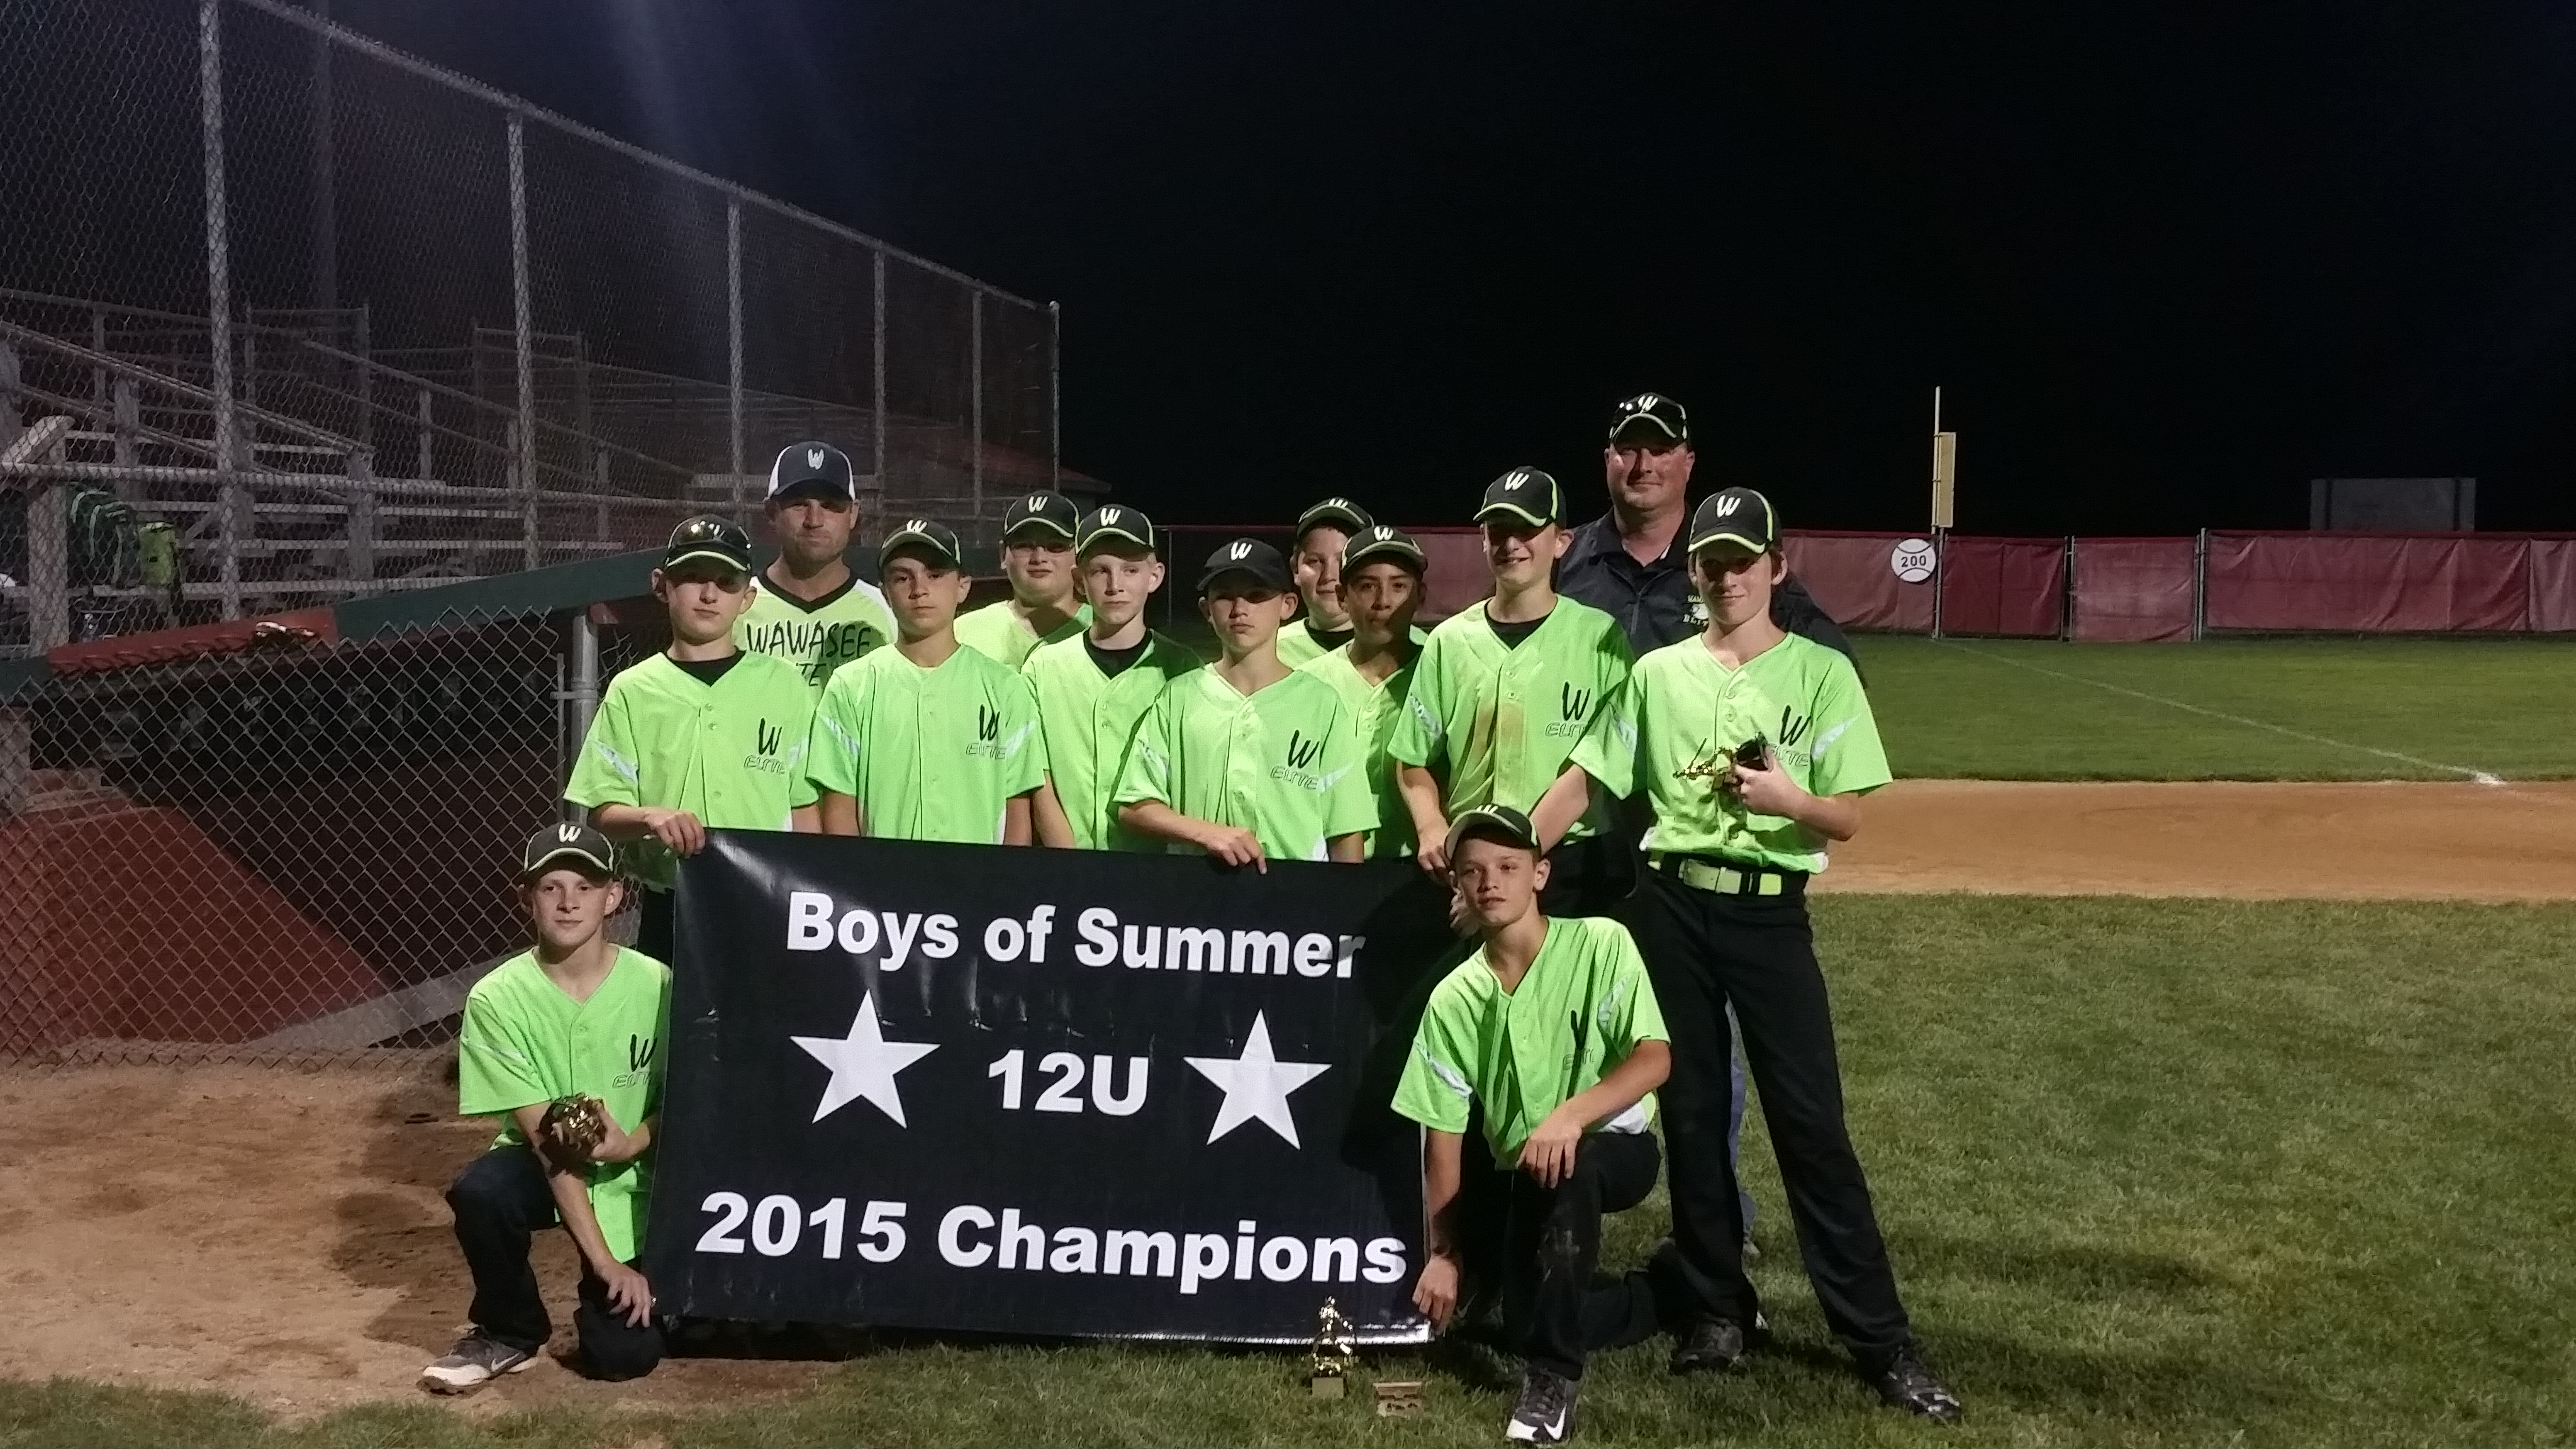 The Wawasee Elite 12U team won the Boys of Summer League regular season and tourney championships (Photo provided by Mindy Brooks)